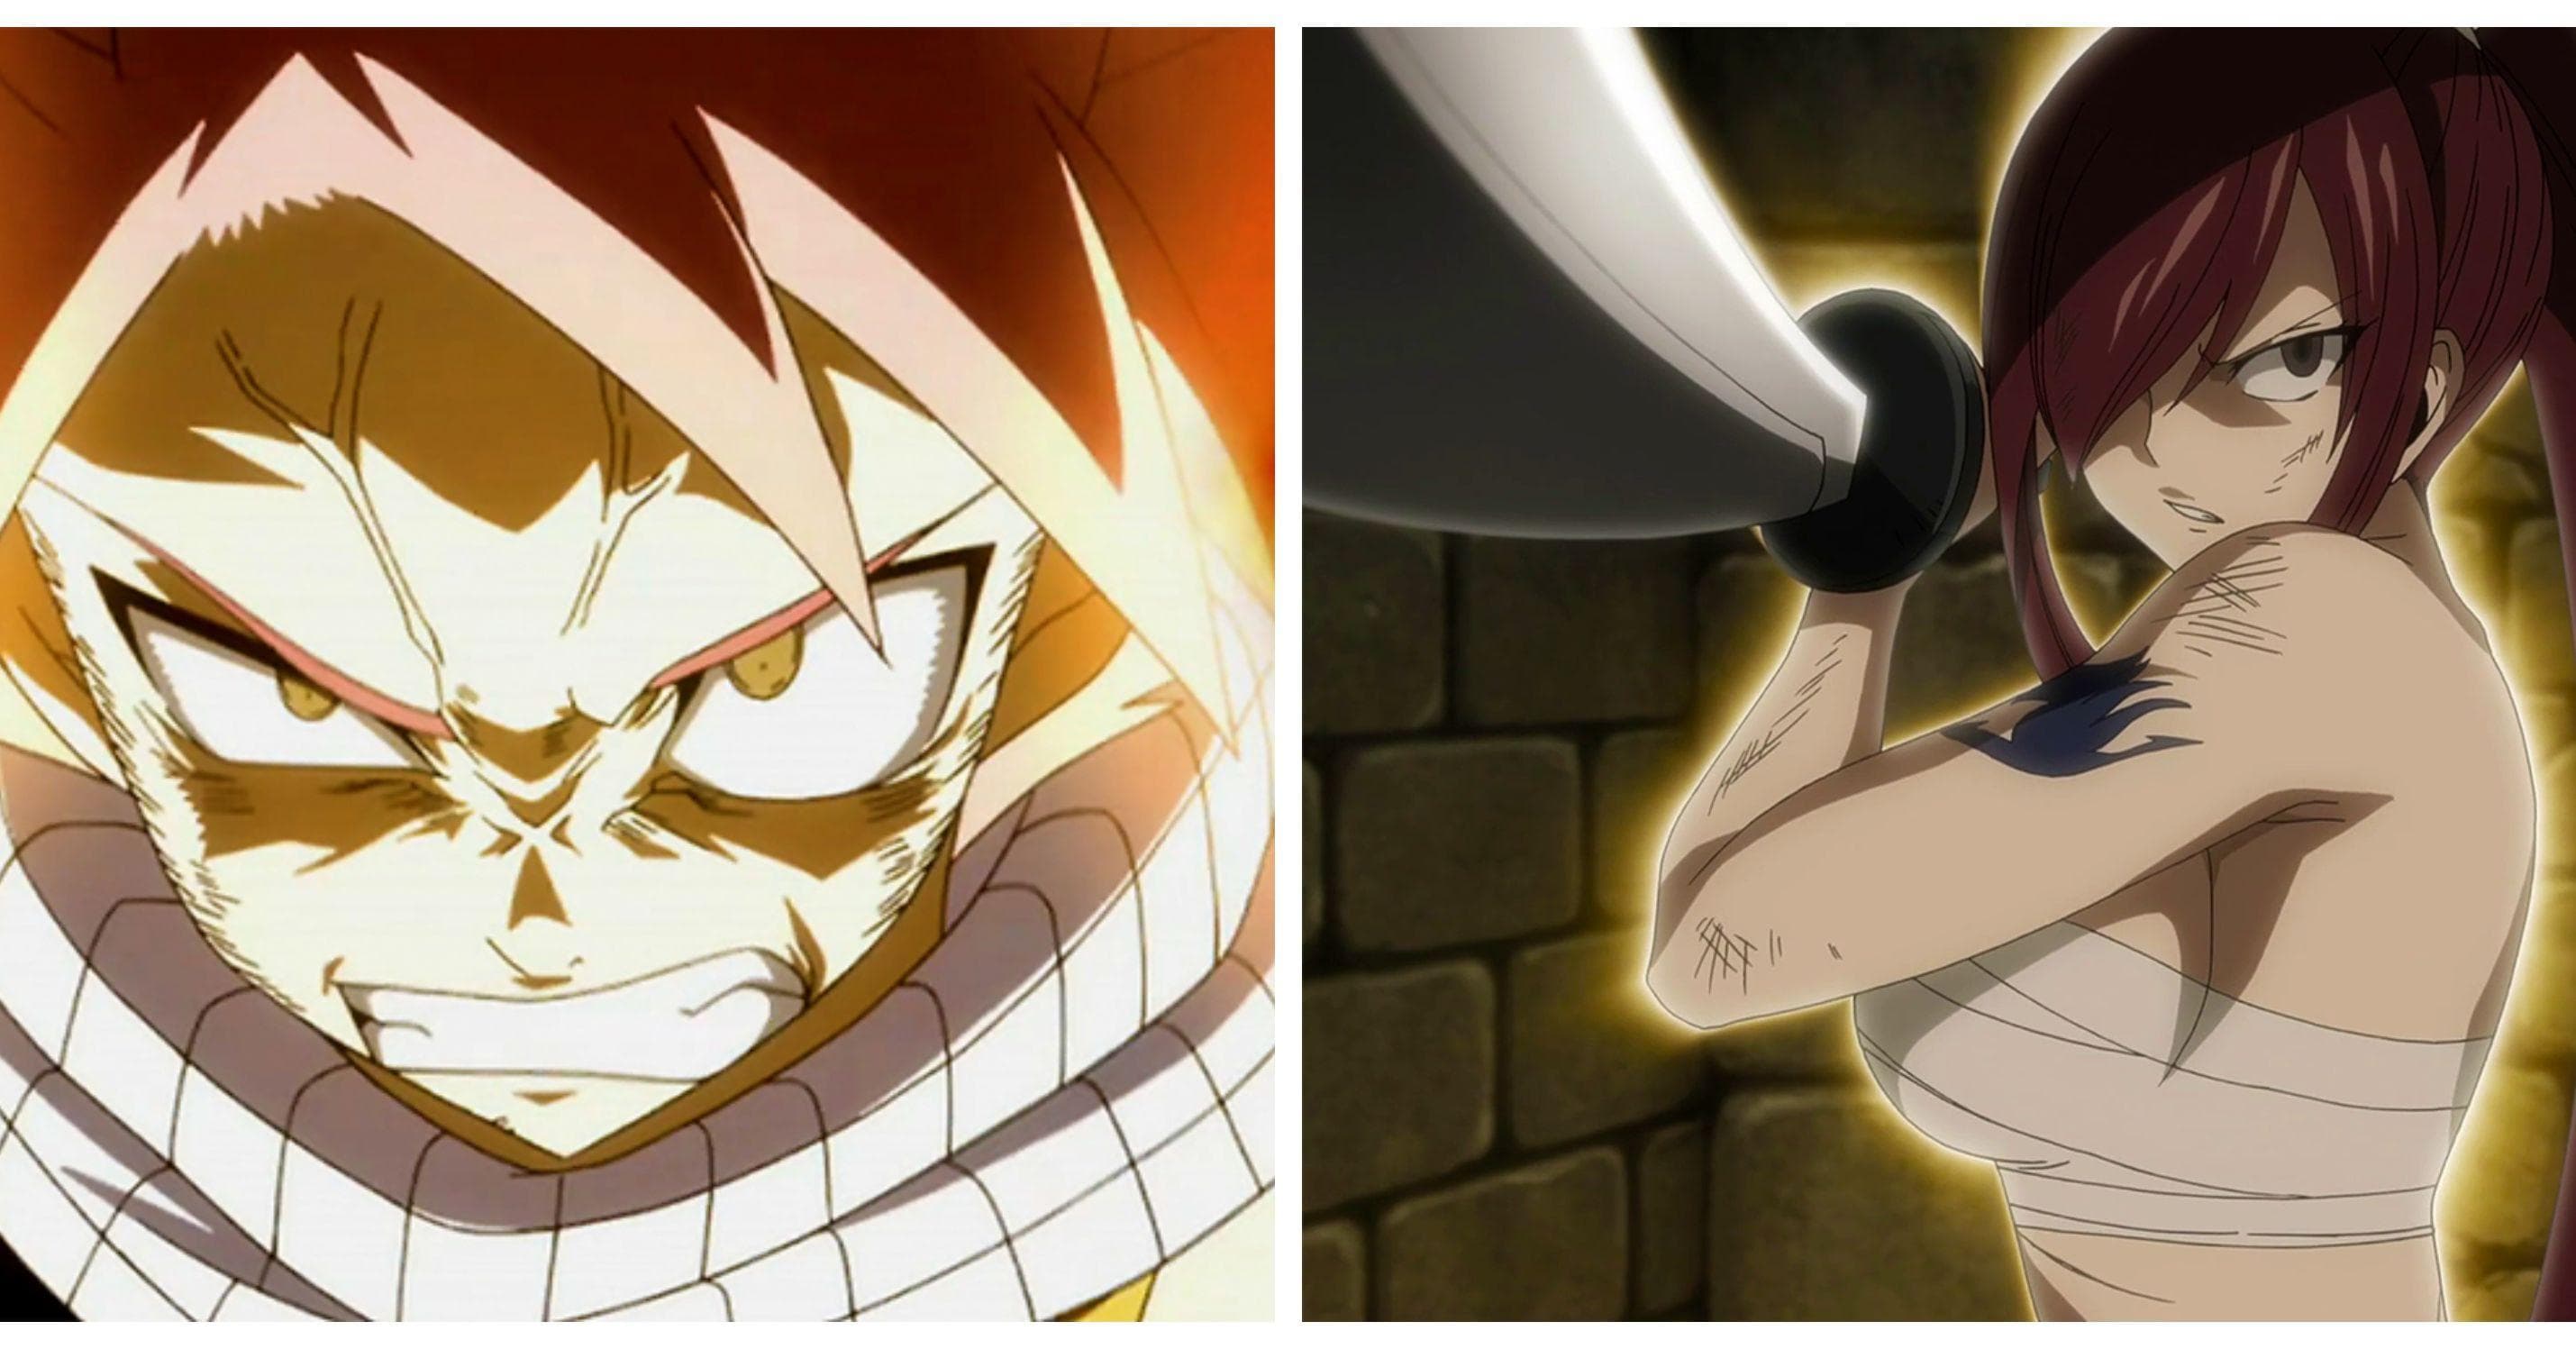 Natsu Dragneel's Strongest Form in Fairy Tail